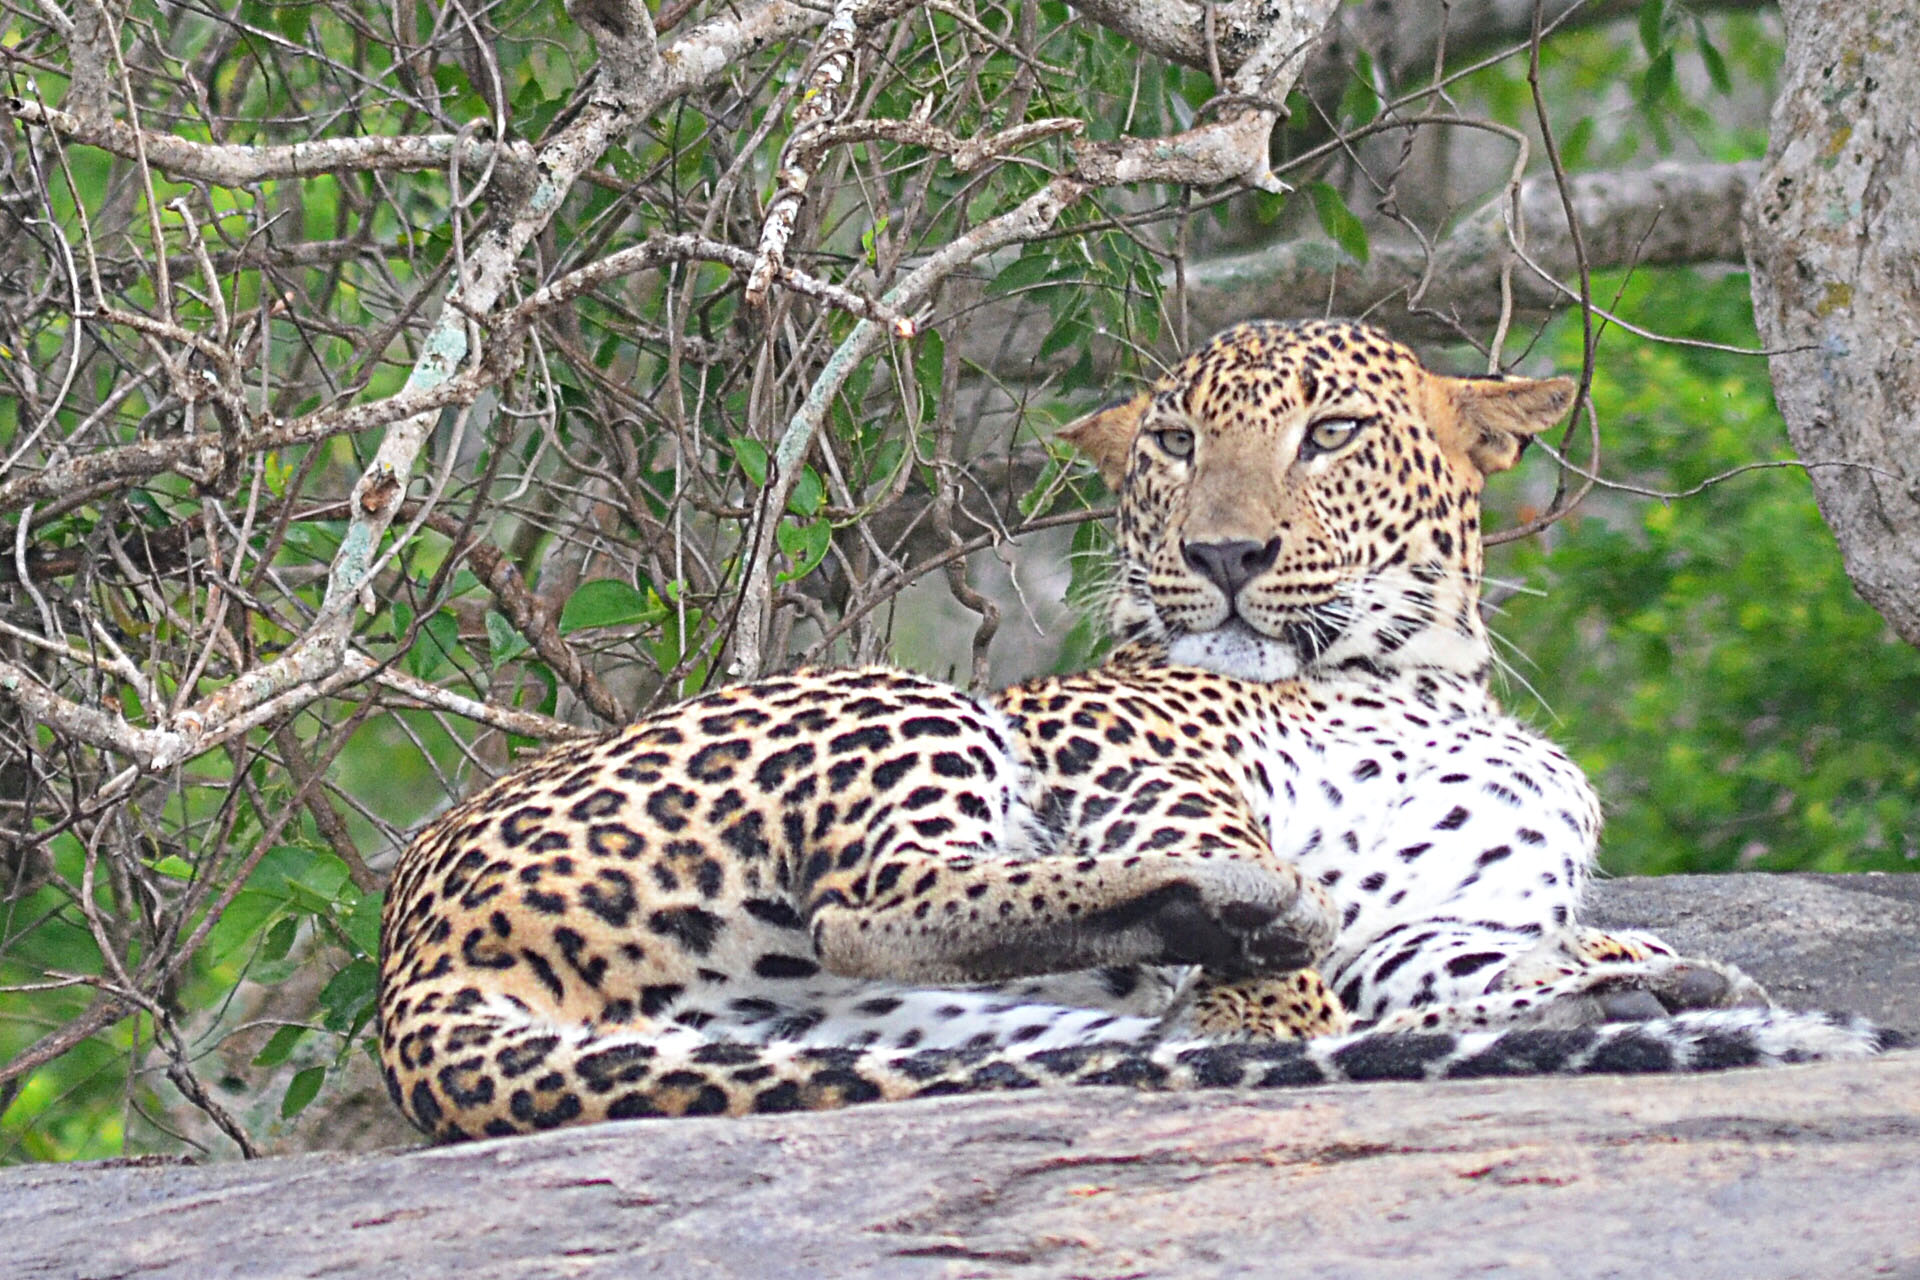 two leopards lay down on rocks next to trees